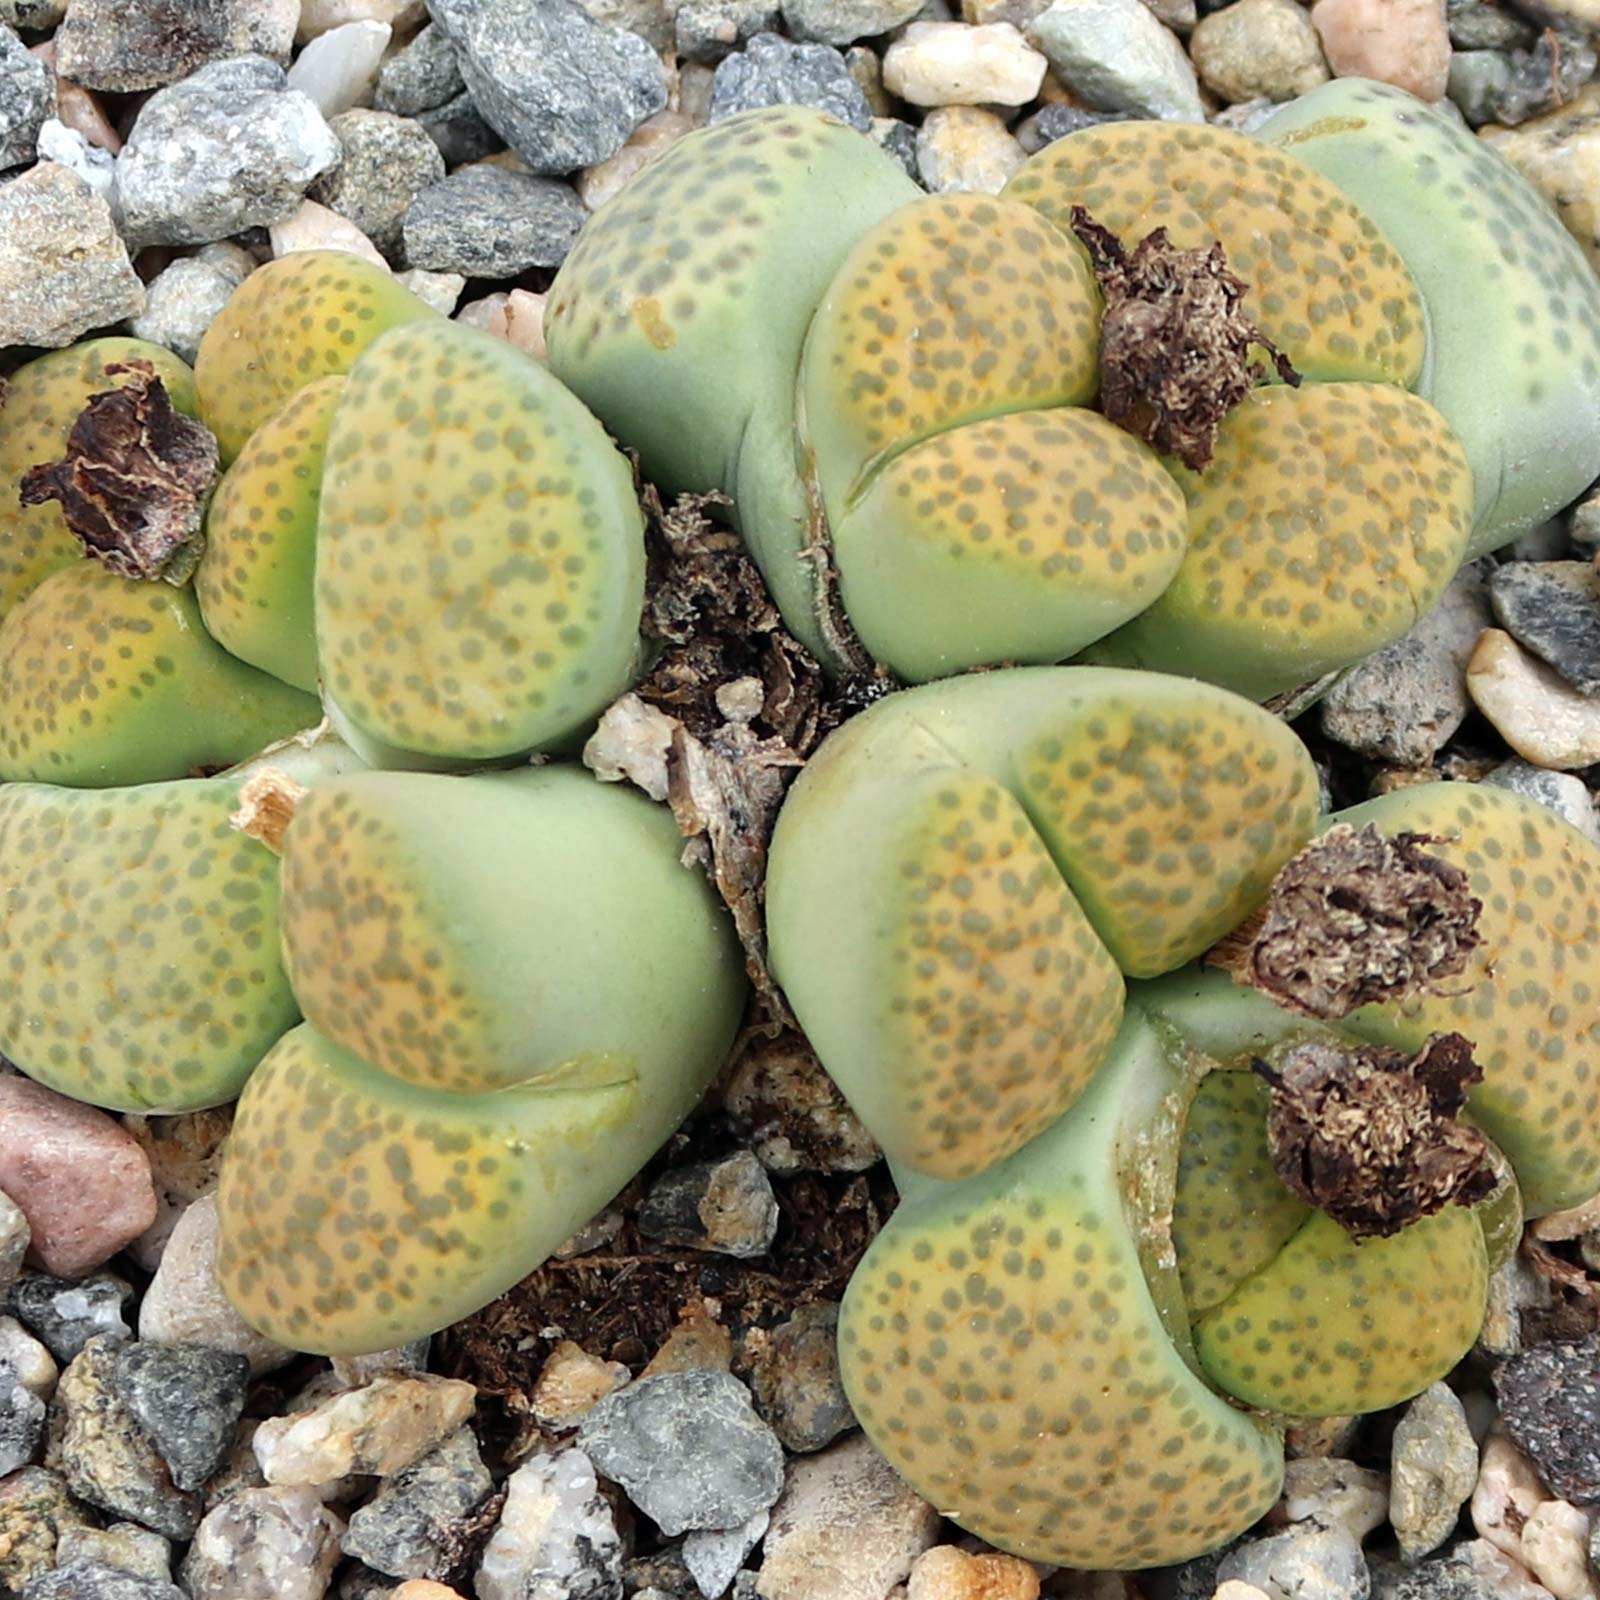 Are the Lithops planted already?